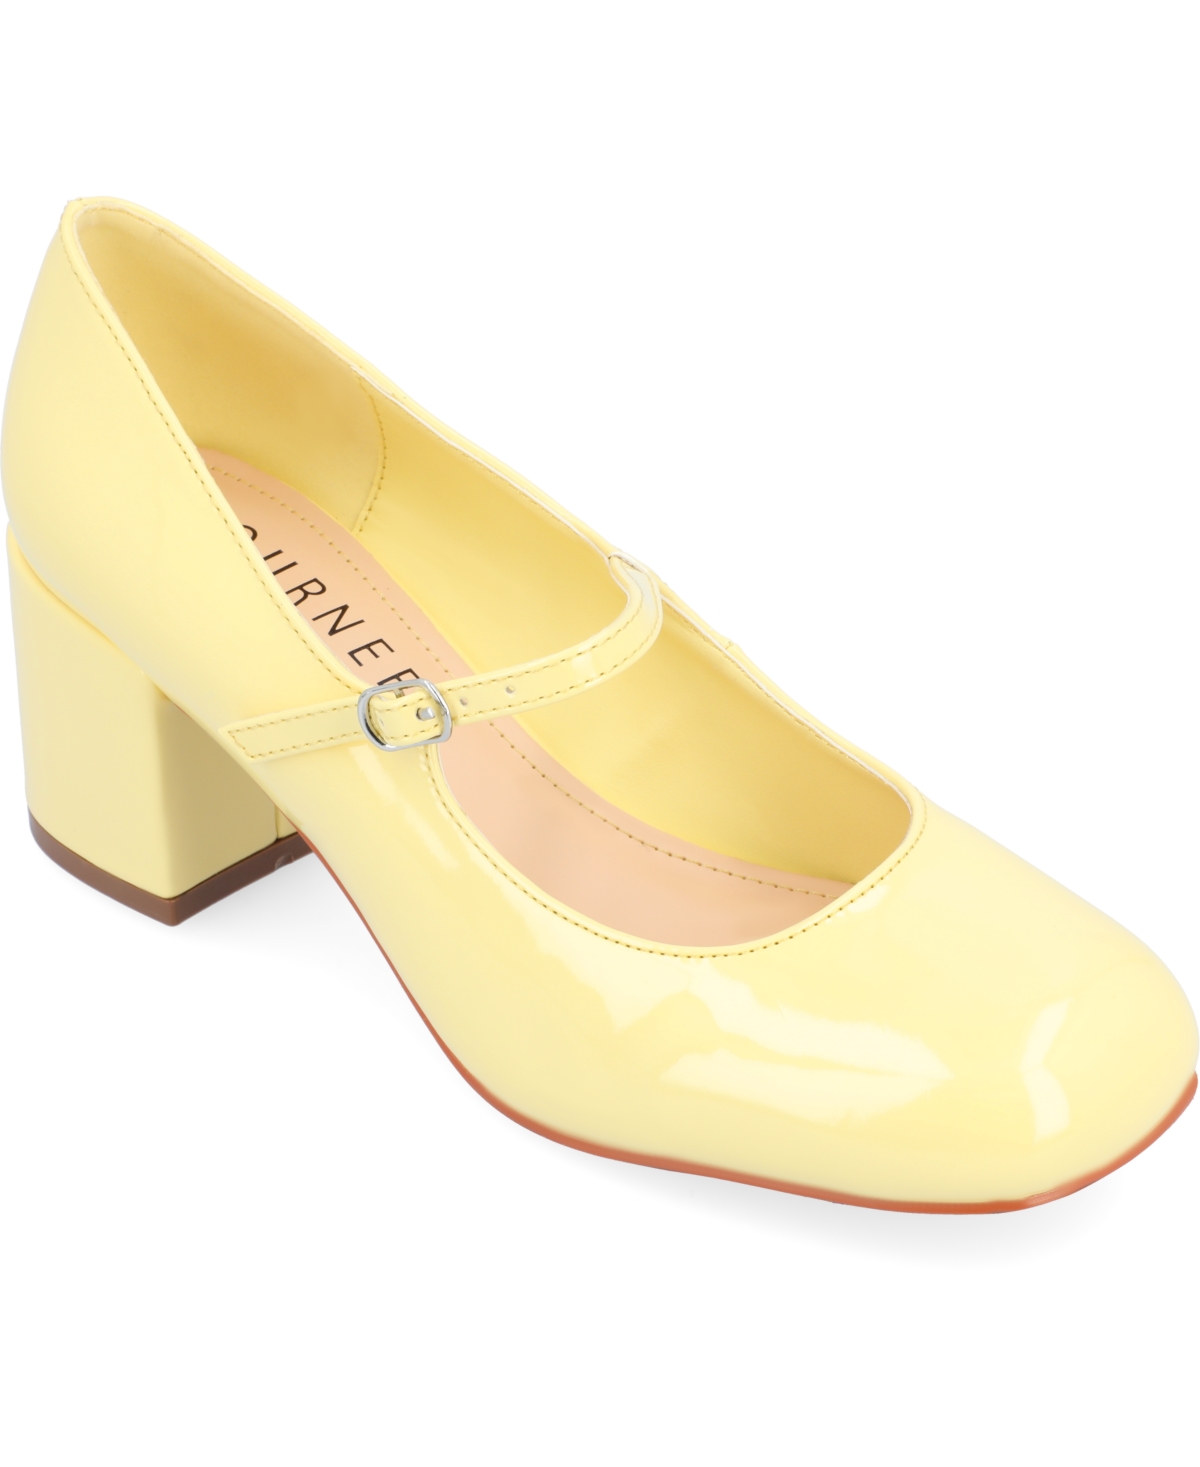 Vintage Shoes, Vintage Style Shoes Journee Collection Womens Okenna Heels - Yellow $74.99 AT vintagedancer.com